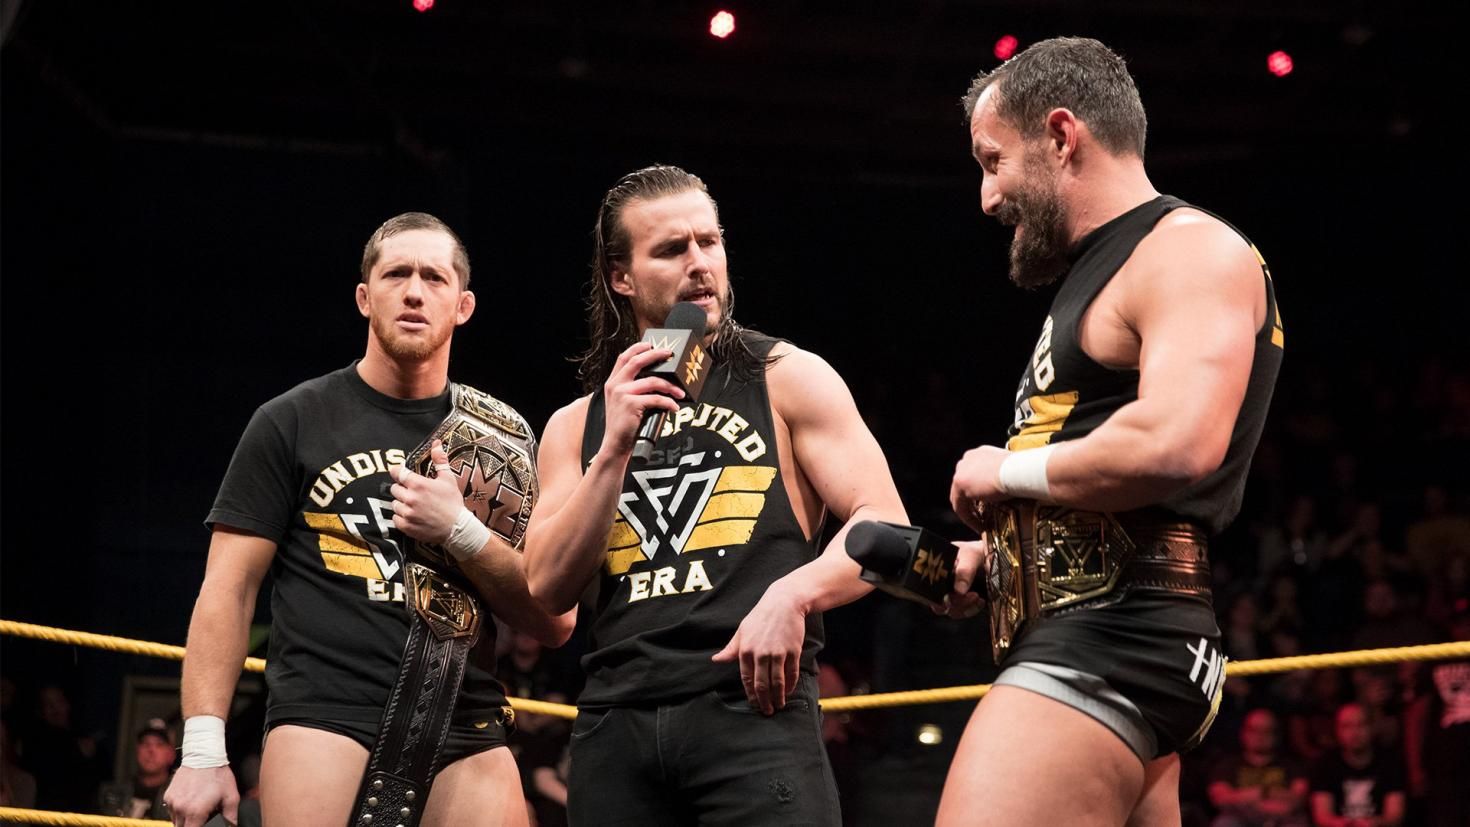 The Undisputed Era on NXT